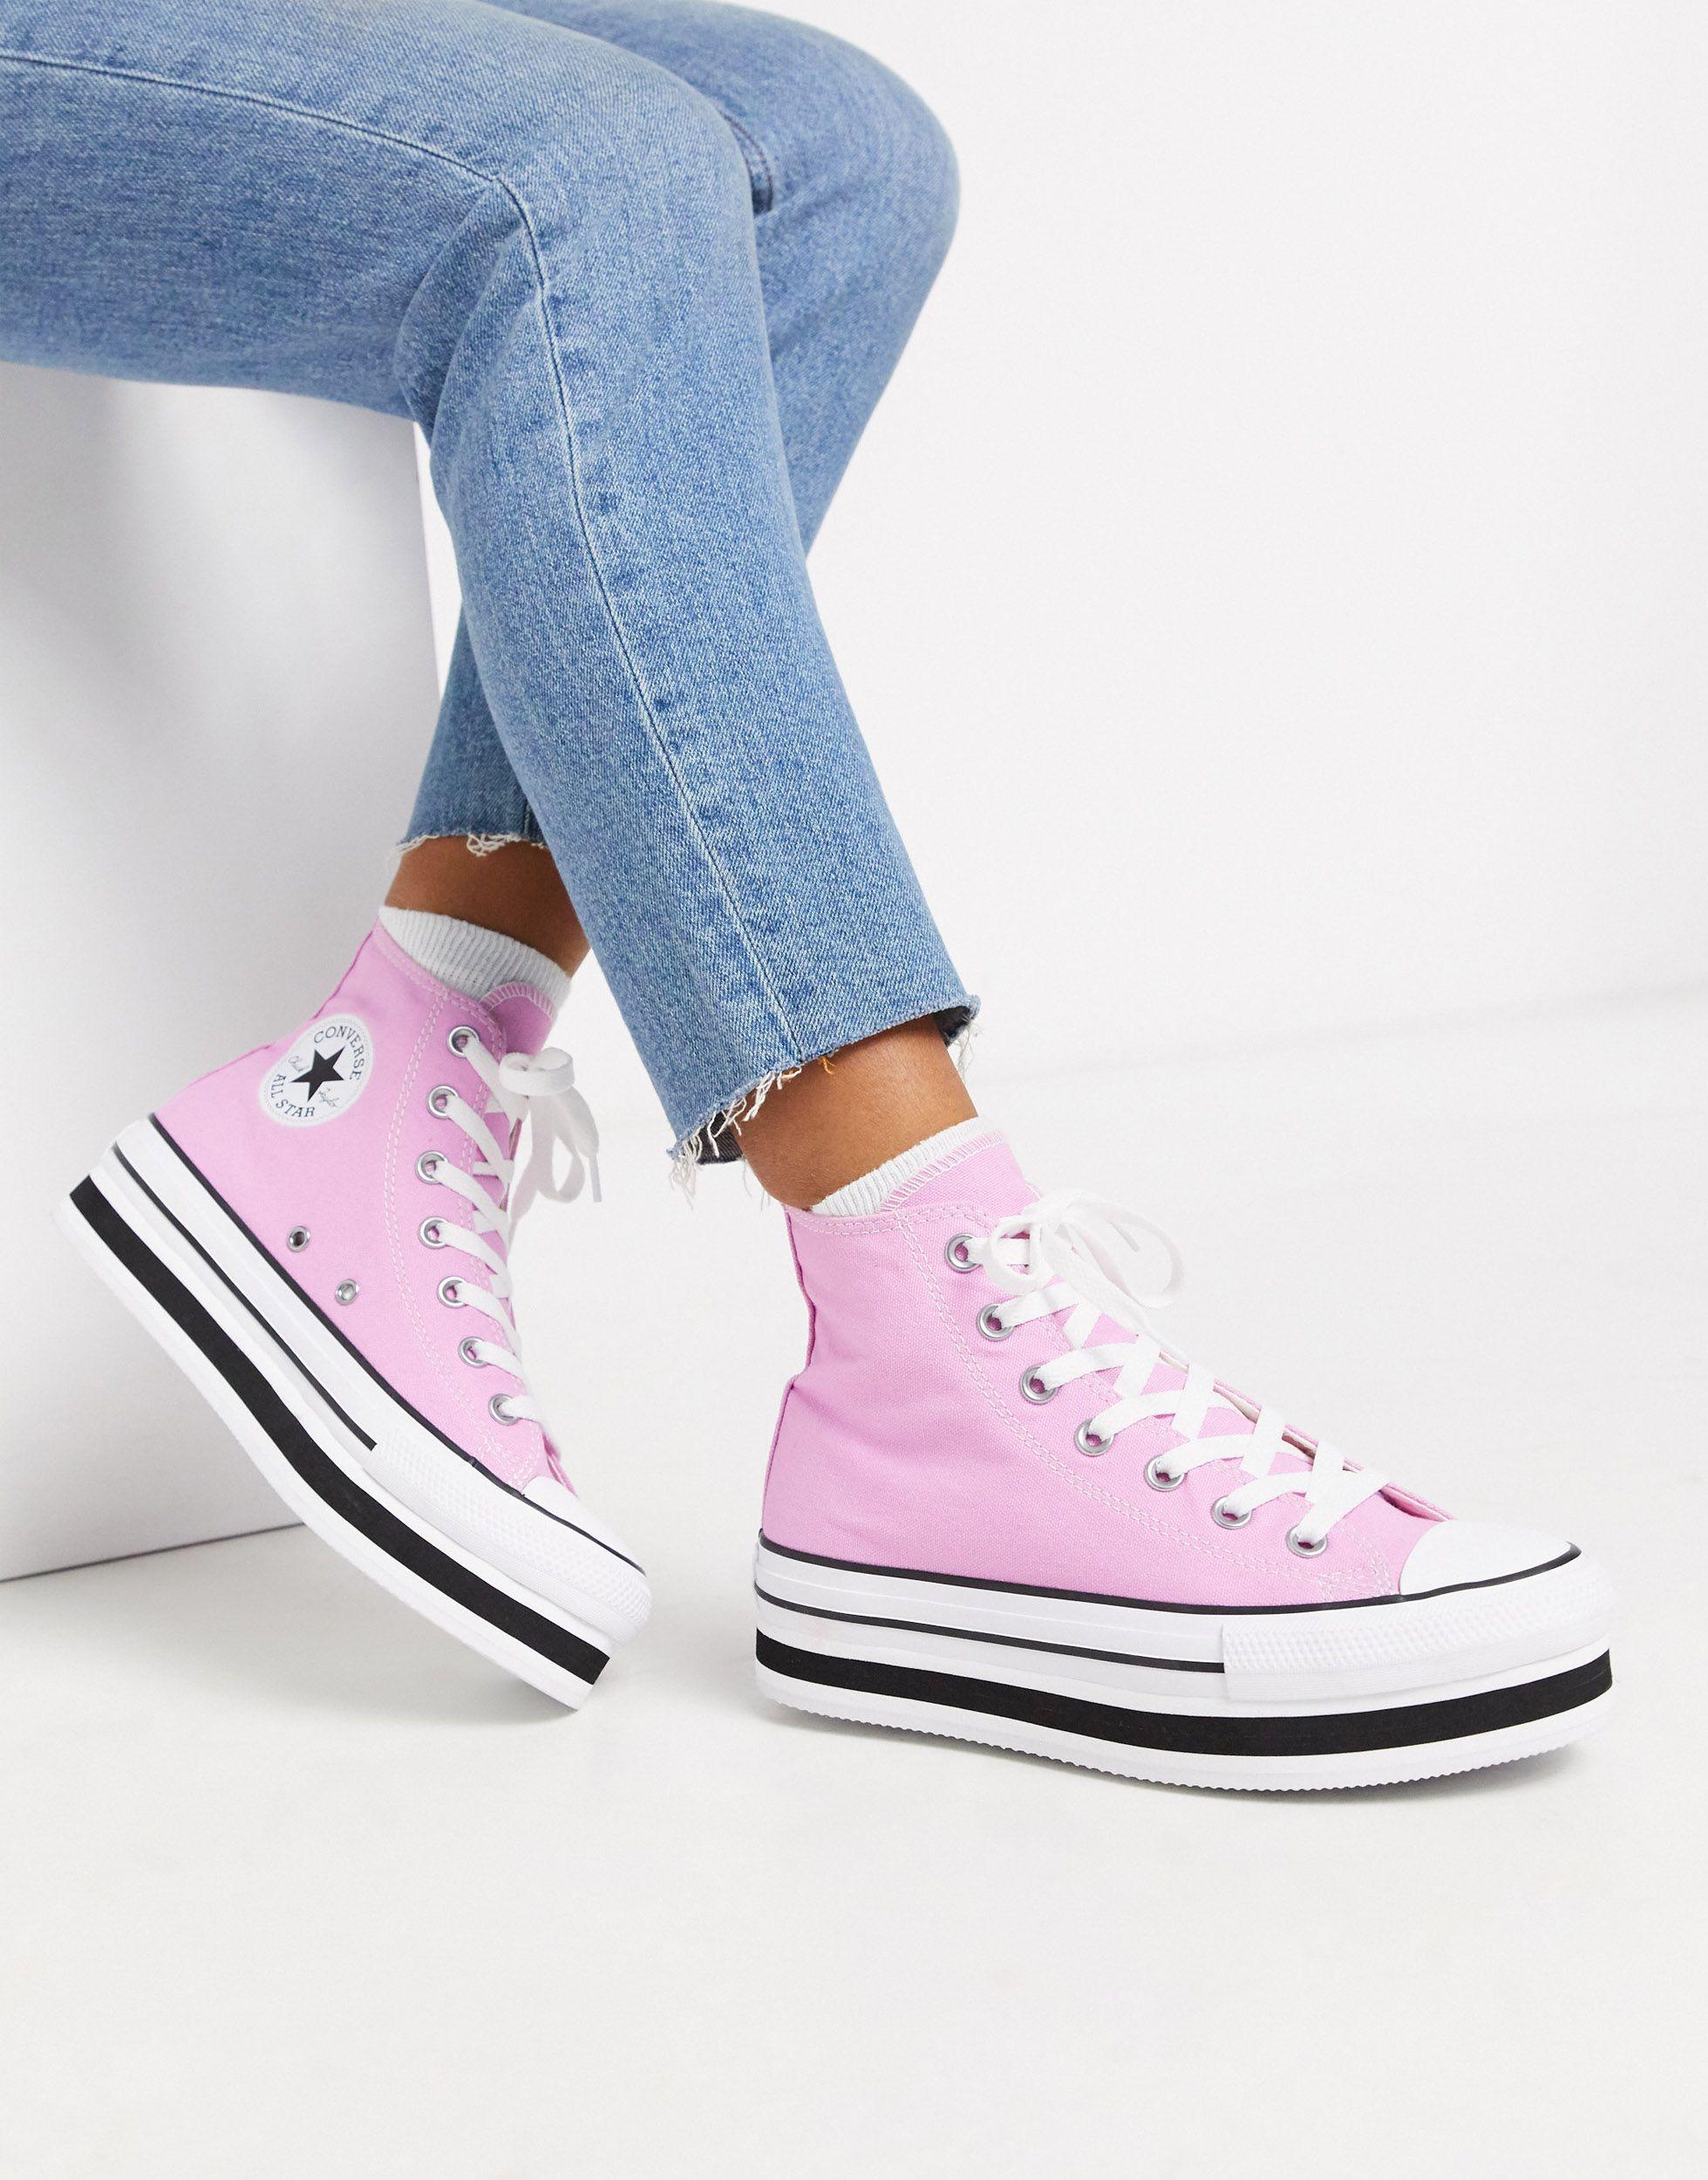 Converse Taylor Hi Layer Pink Sneakers Lyst